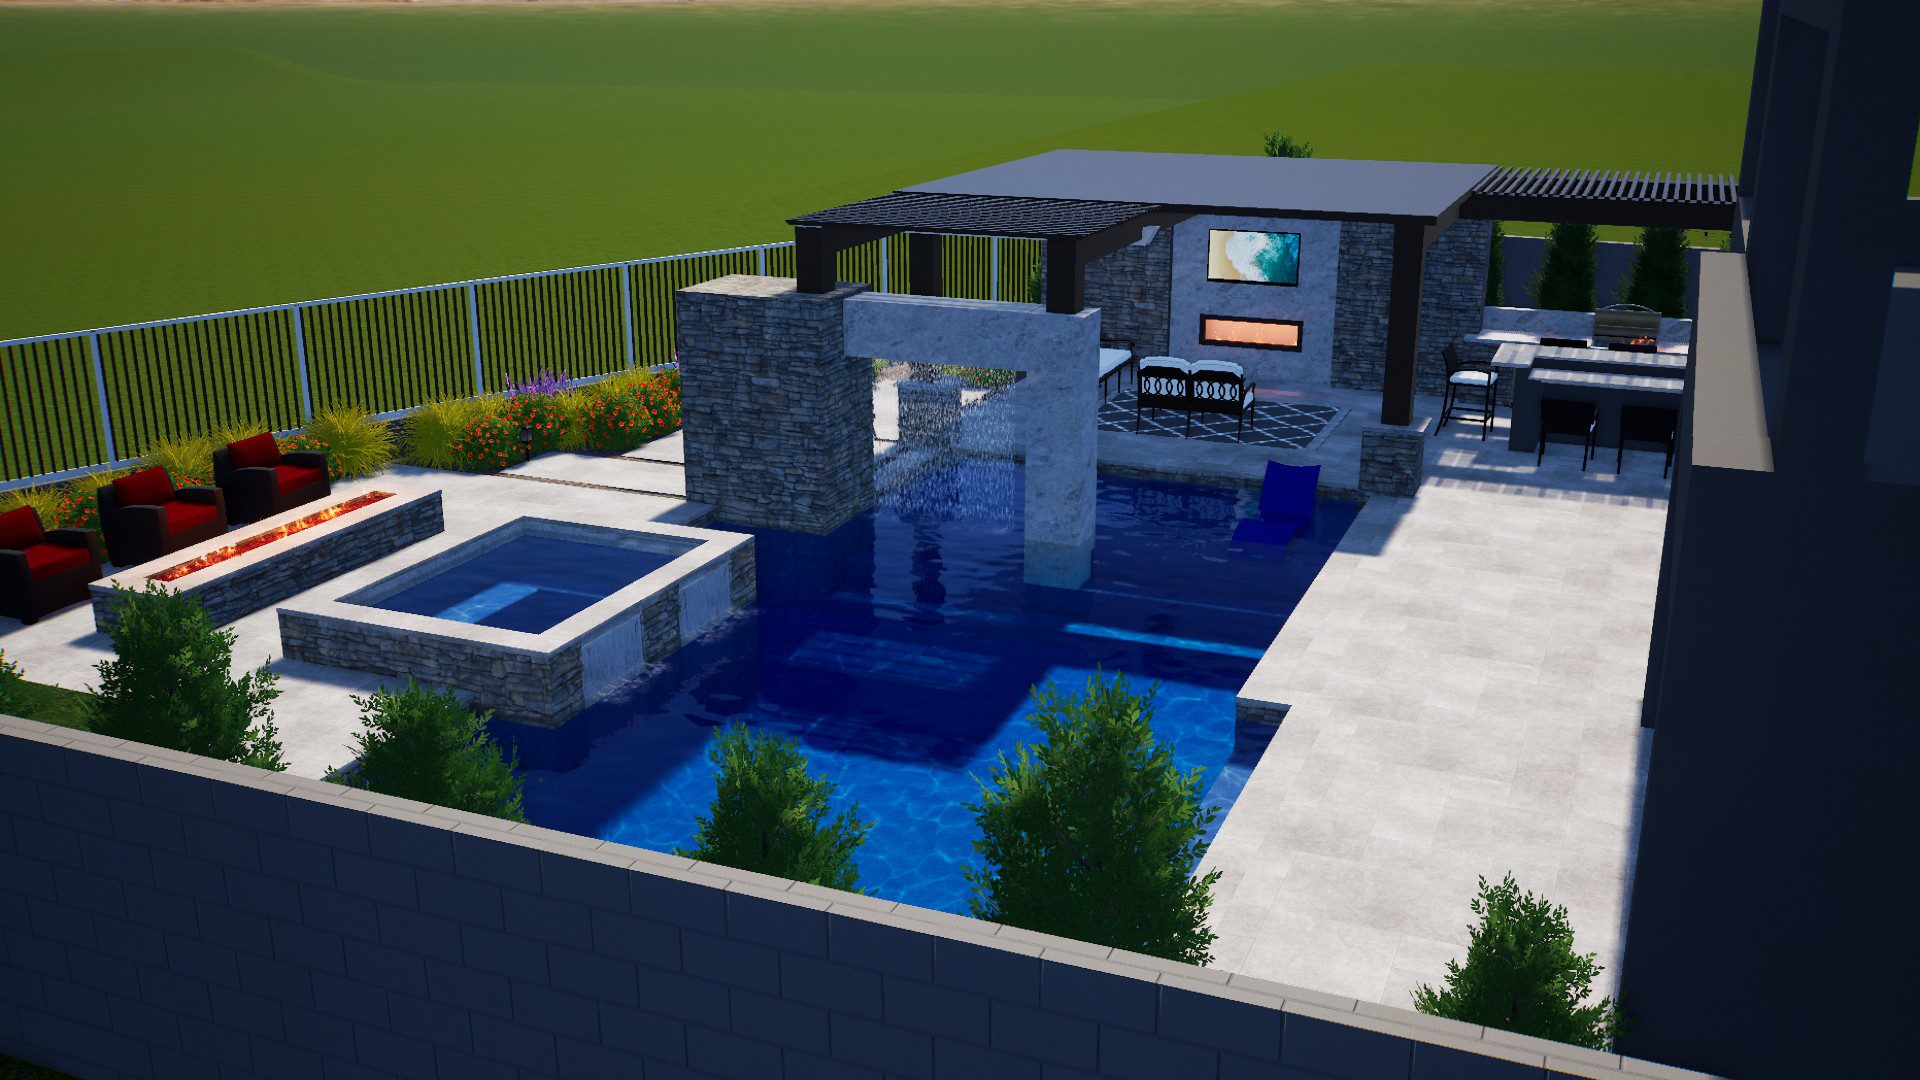 A rendering of an outdoor living area with pool and television.